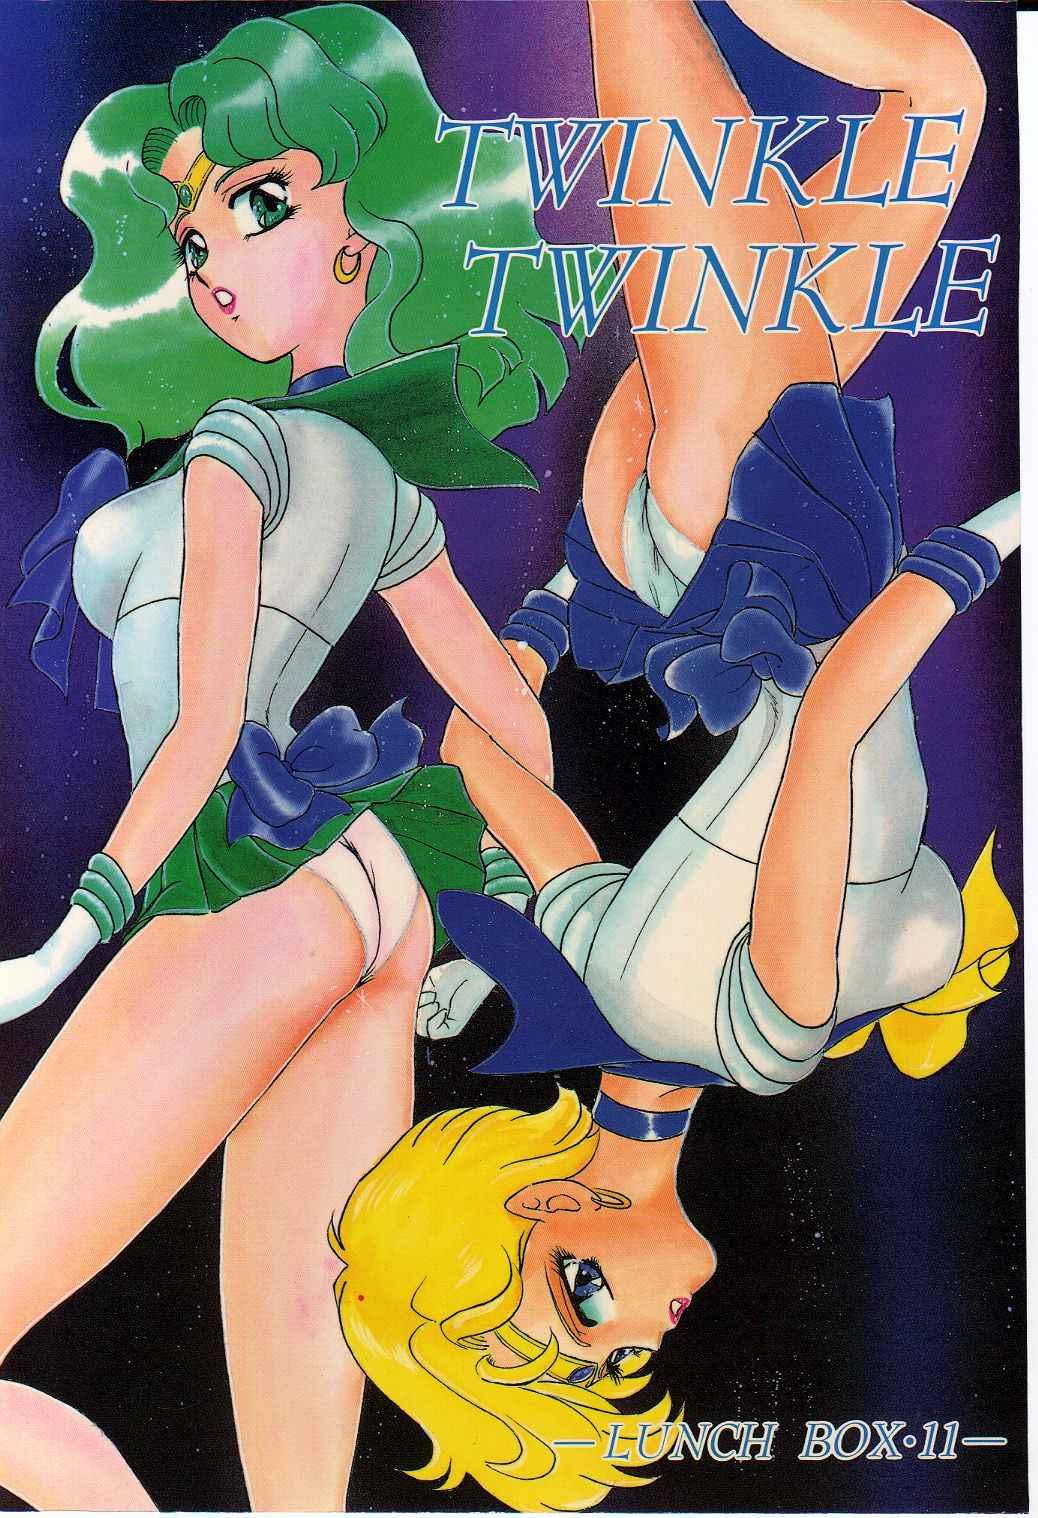 Pay Lunch Box 11 - Twinkle Twinkle - Sailor moon Big Penis - Page 1